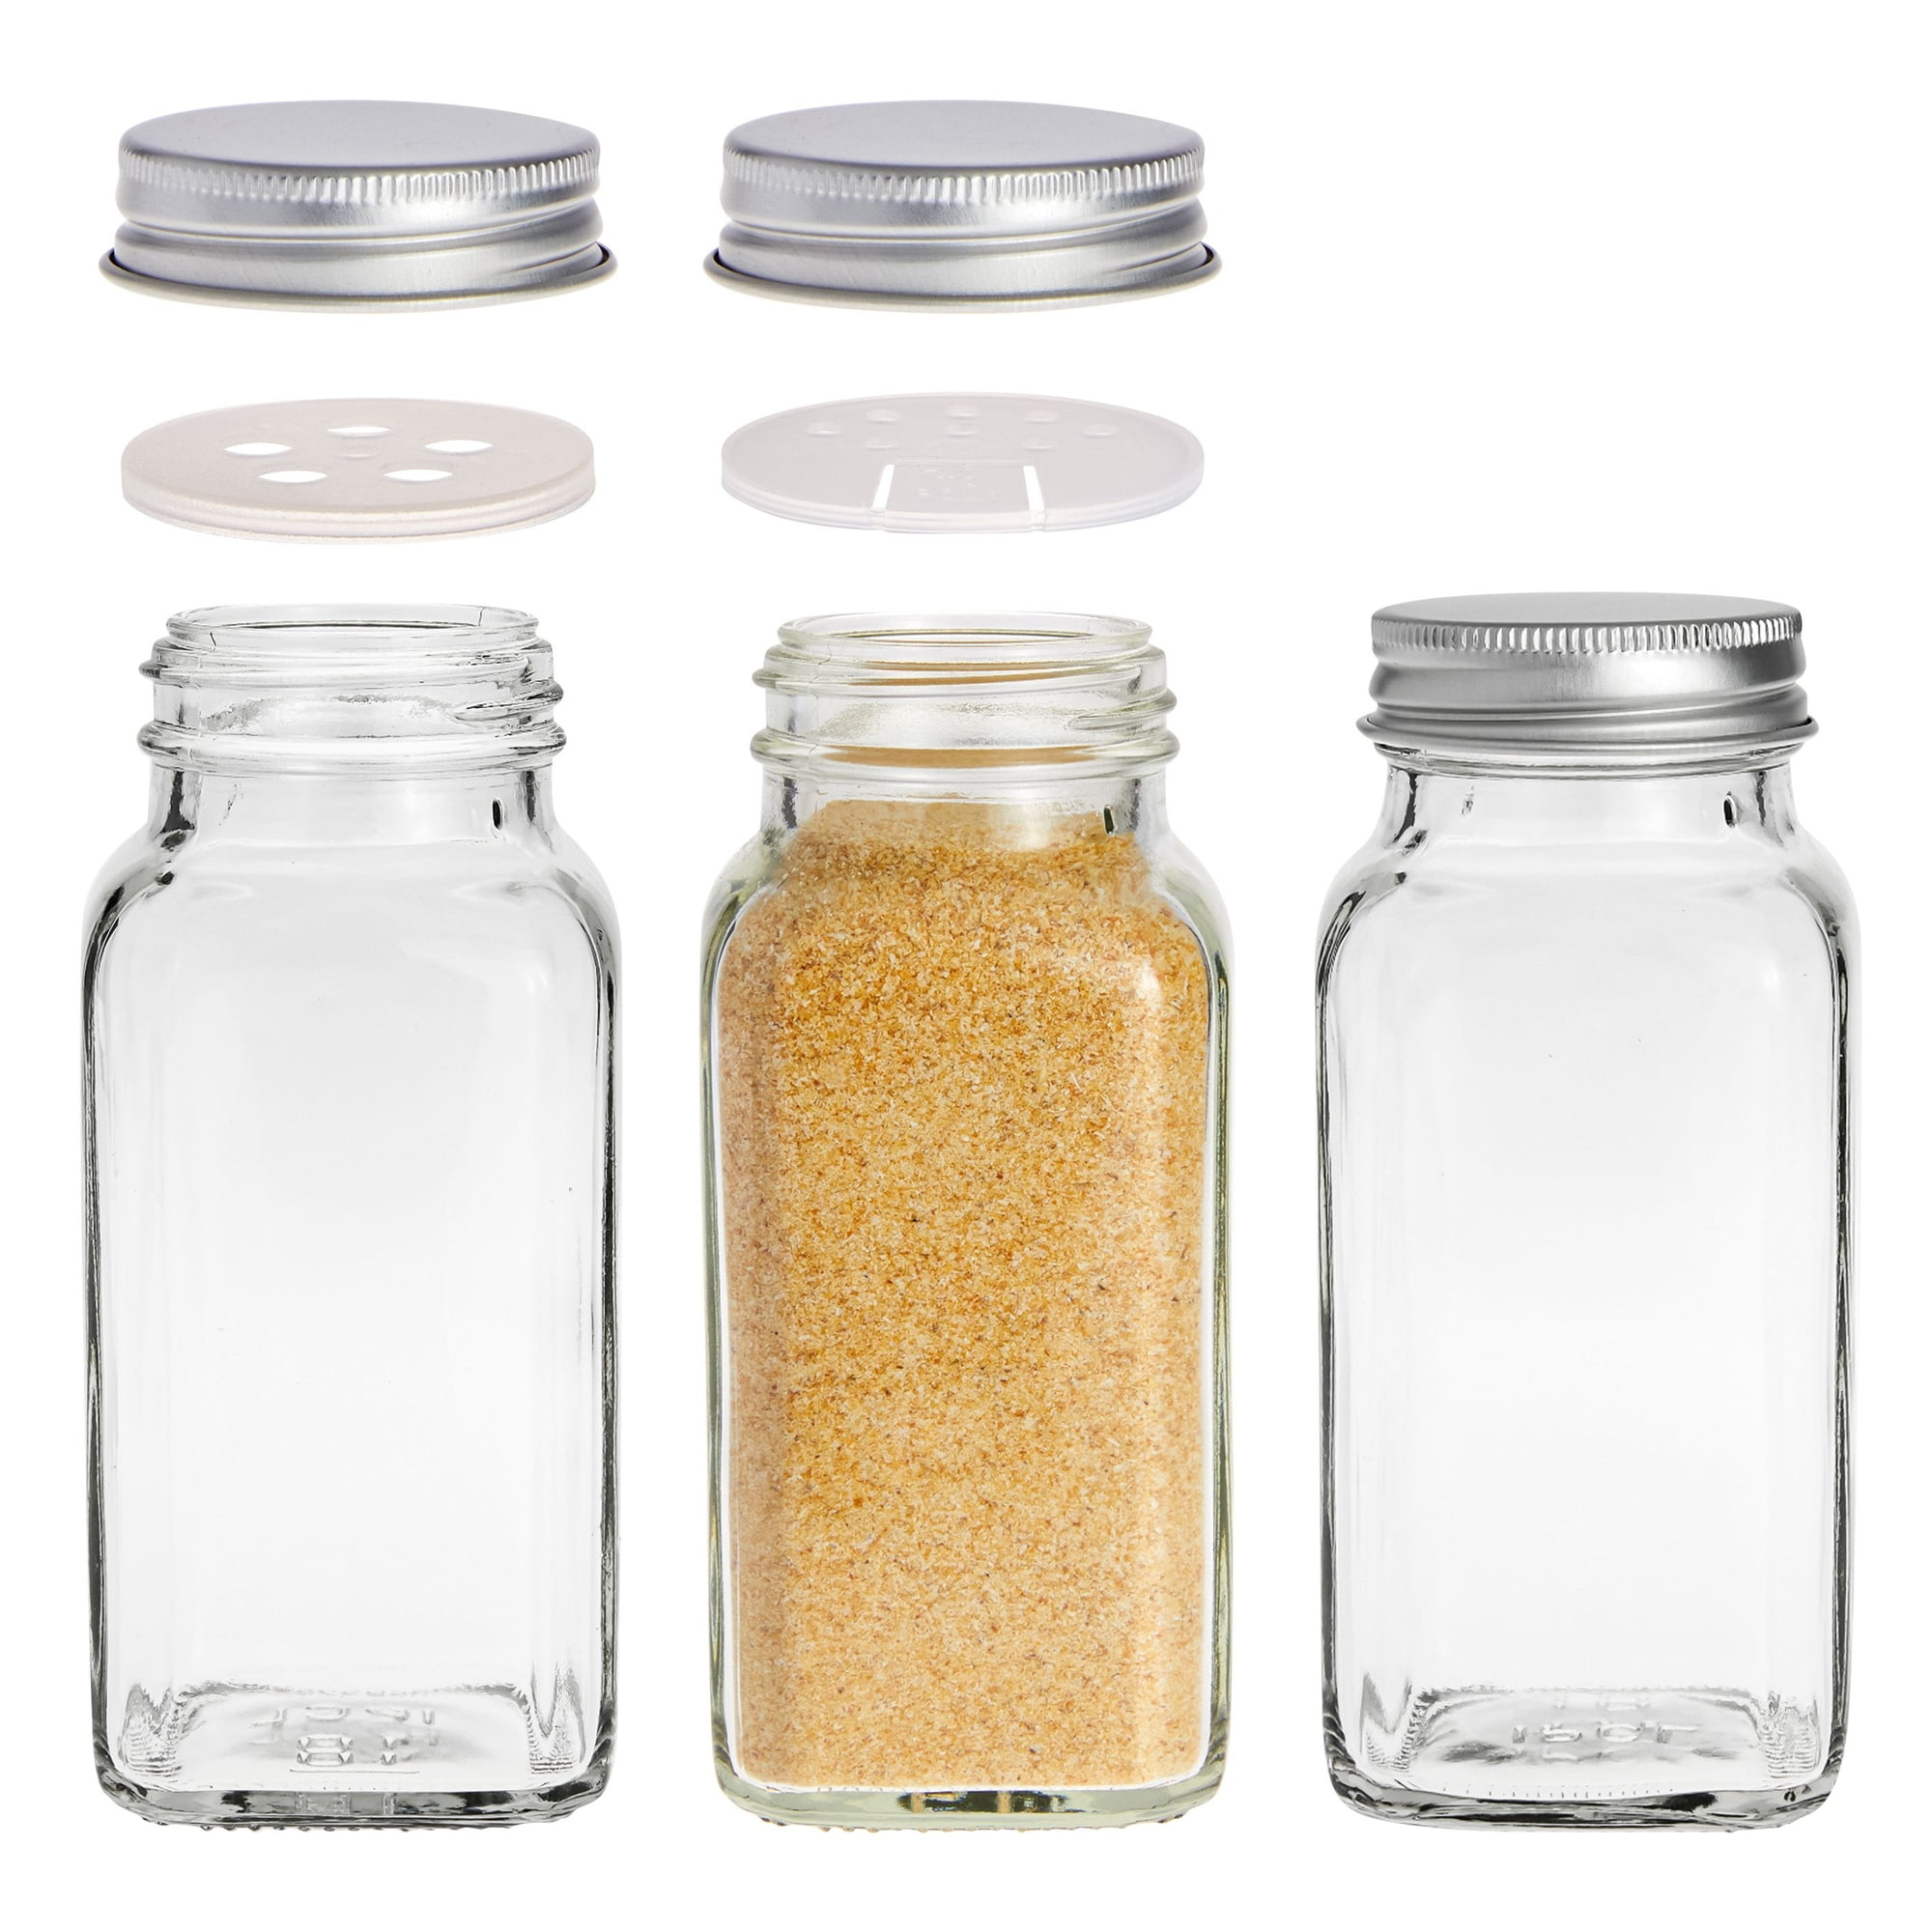 6oz, BEST VALUE 14 Glass Spice Jars includes pre-printed Spice